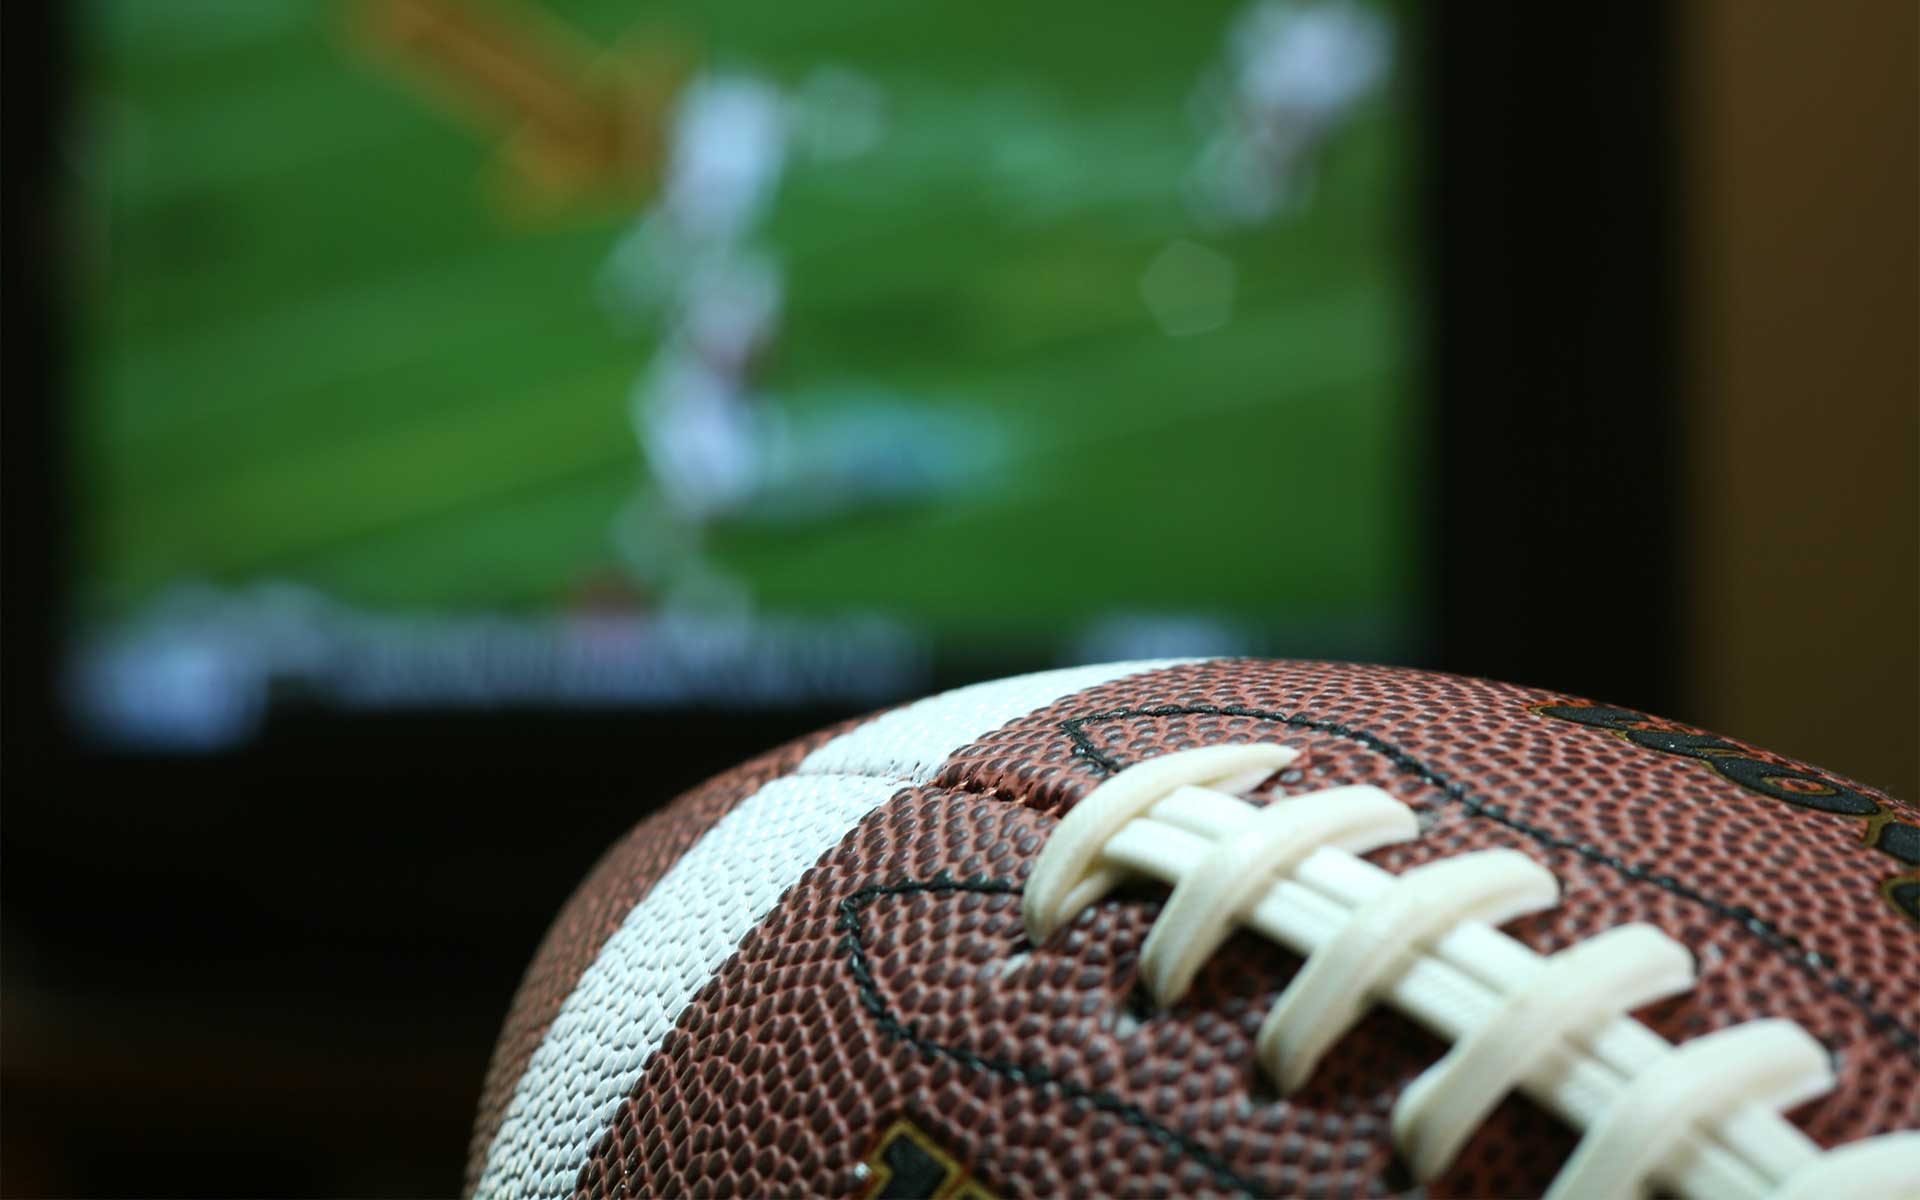 Get Ready for Super Bowl Sunday<br><span>SONY, SAMSUNG AND LG TV DEALS AT MIR AUDIO & VIDEO</span>